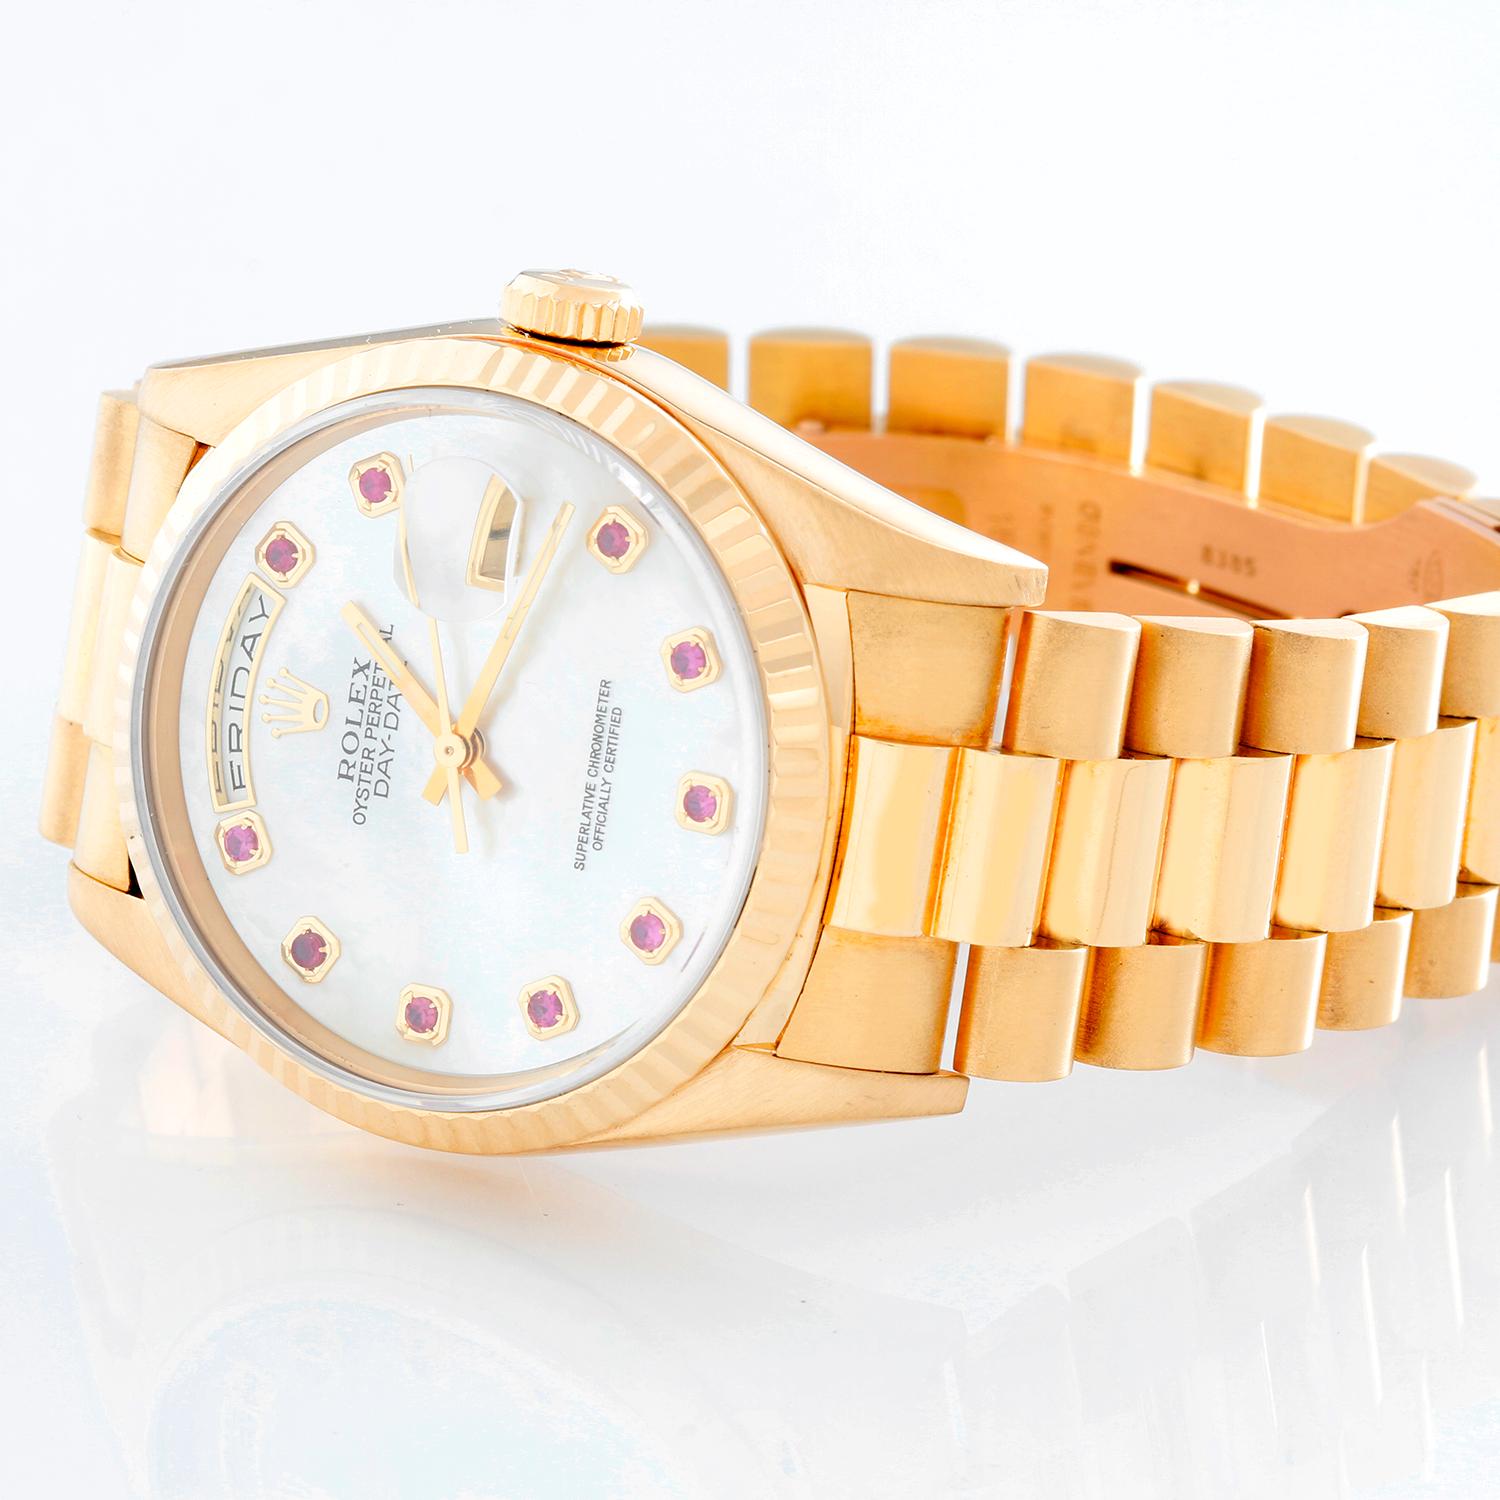 Men's Rolex President Day-Date Watch Mother of Pearl Ruby  18238 - Automatic winding, 31 jewels, Quickset day/date, sapphire crystal. 18k yellow gold case with fluted bezel  (36mm diameter). Factory Ruby Mother of Pearl dial. 18k yellow gold